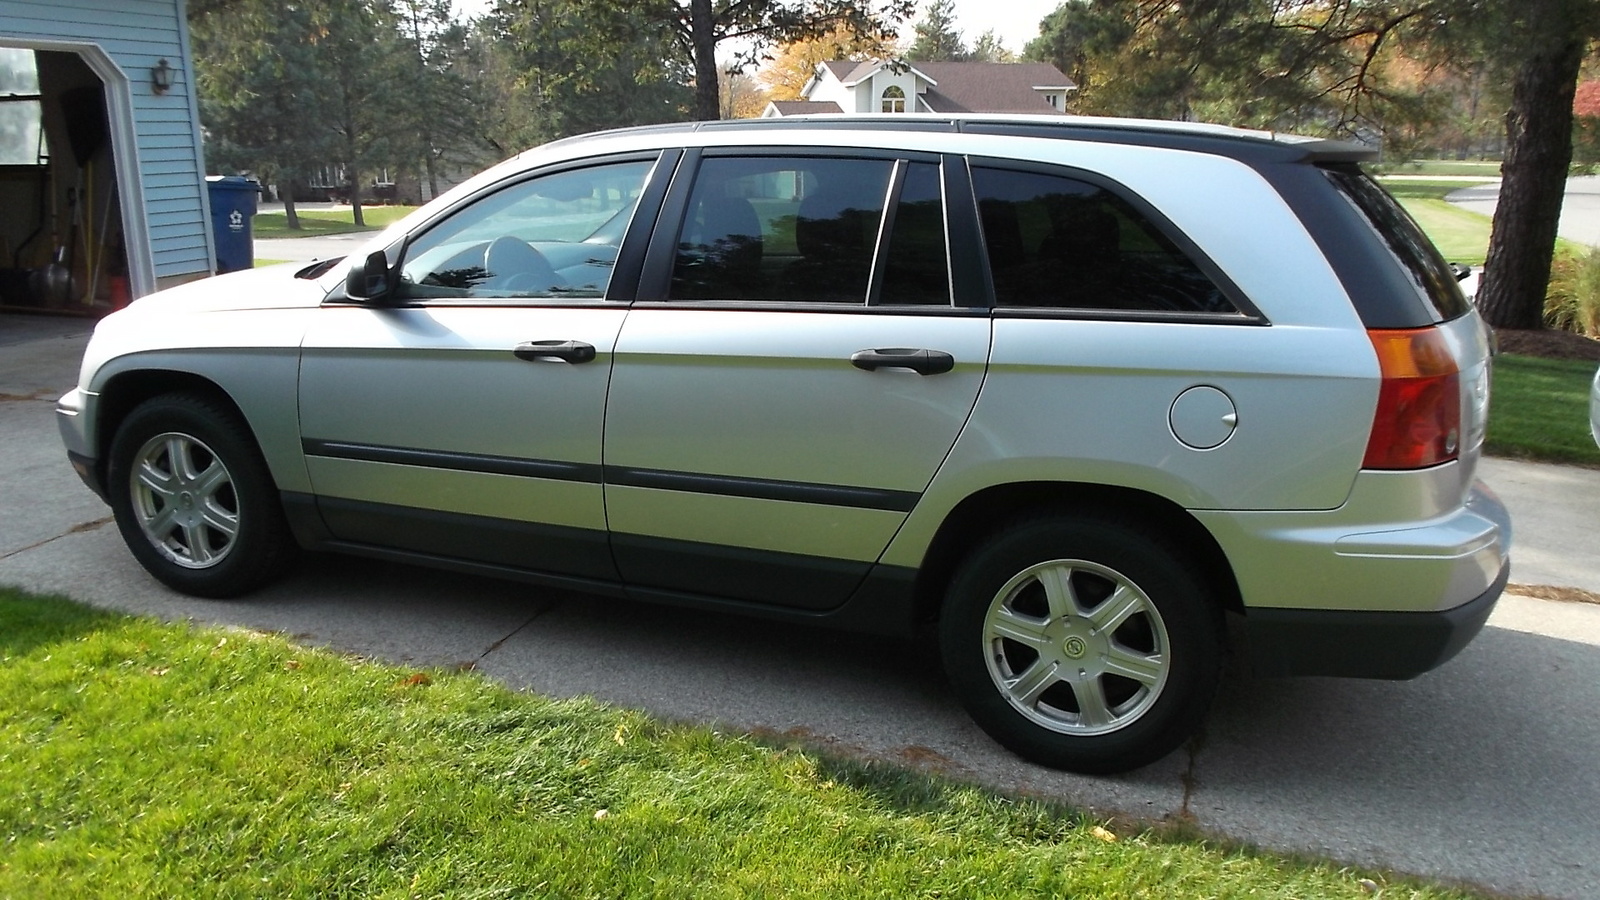 Are 2005 chrysler pacificas good cars #2